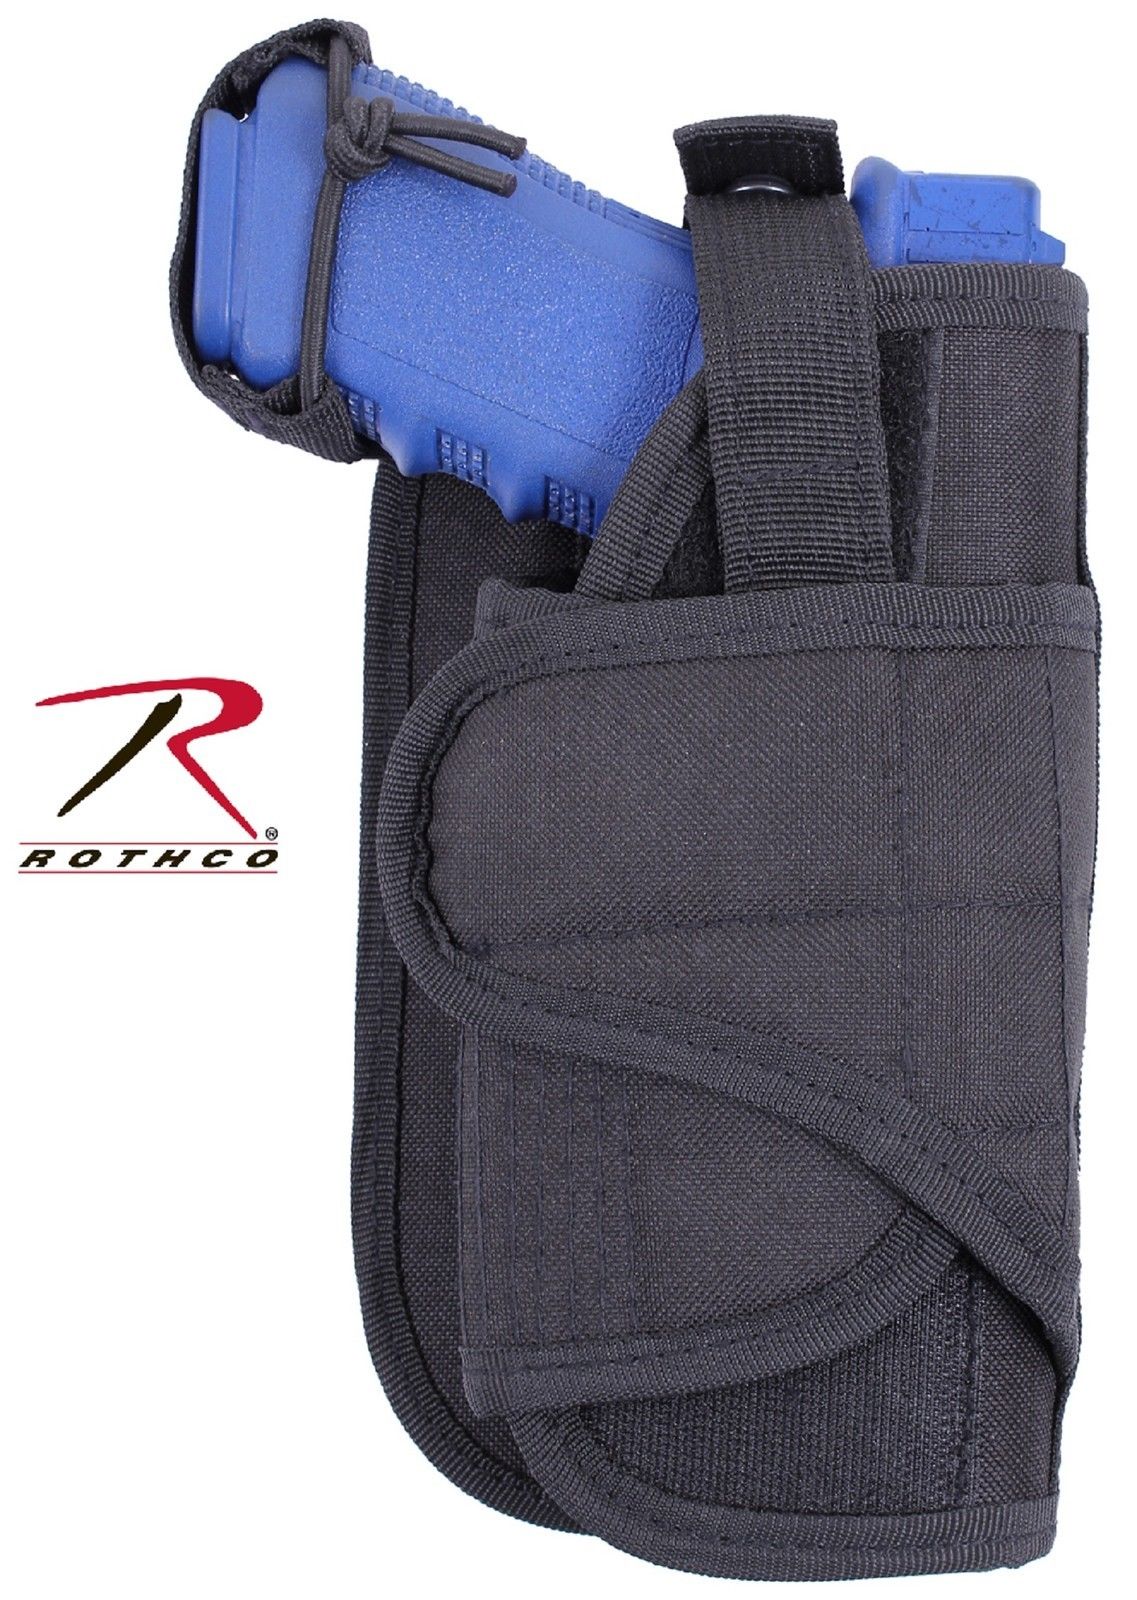 Rothco Black Tactical Vertical Holster - MOLLE Adjustable Holster